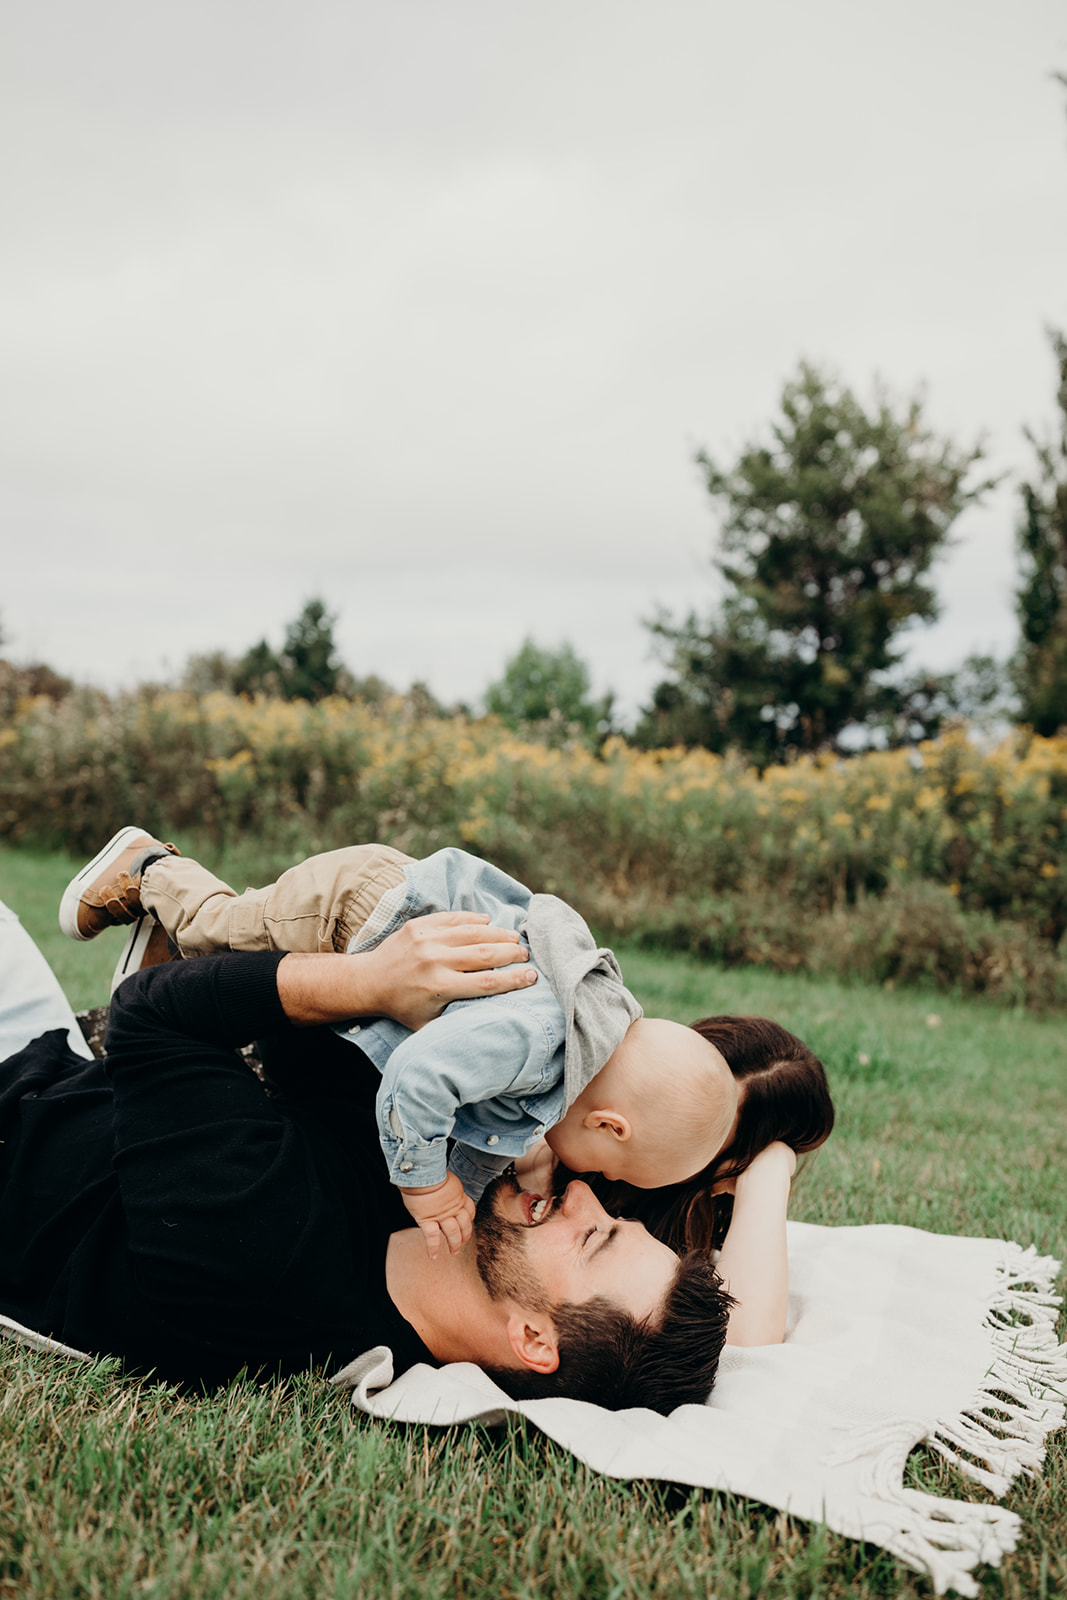 Family snuggles at a picnic during their family photoshoot